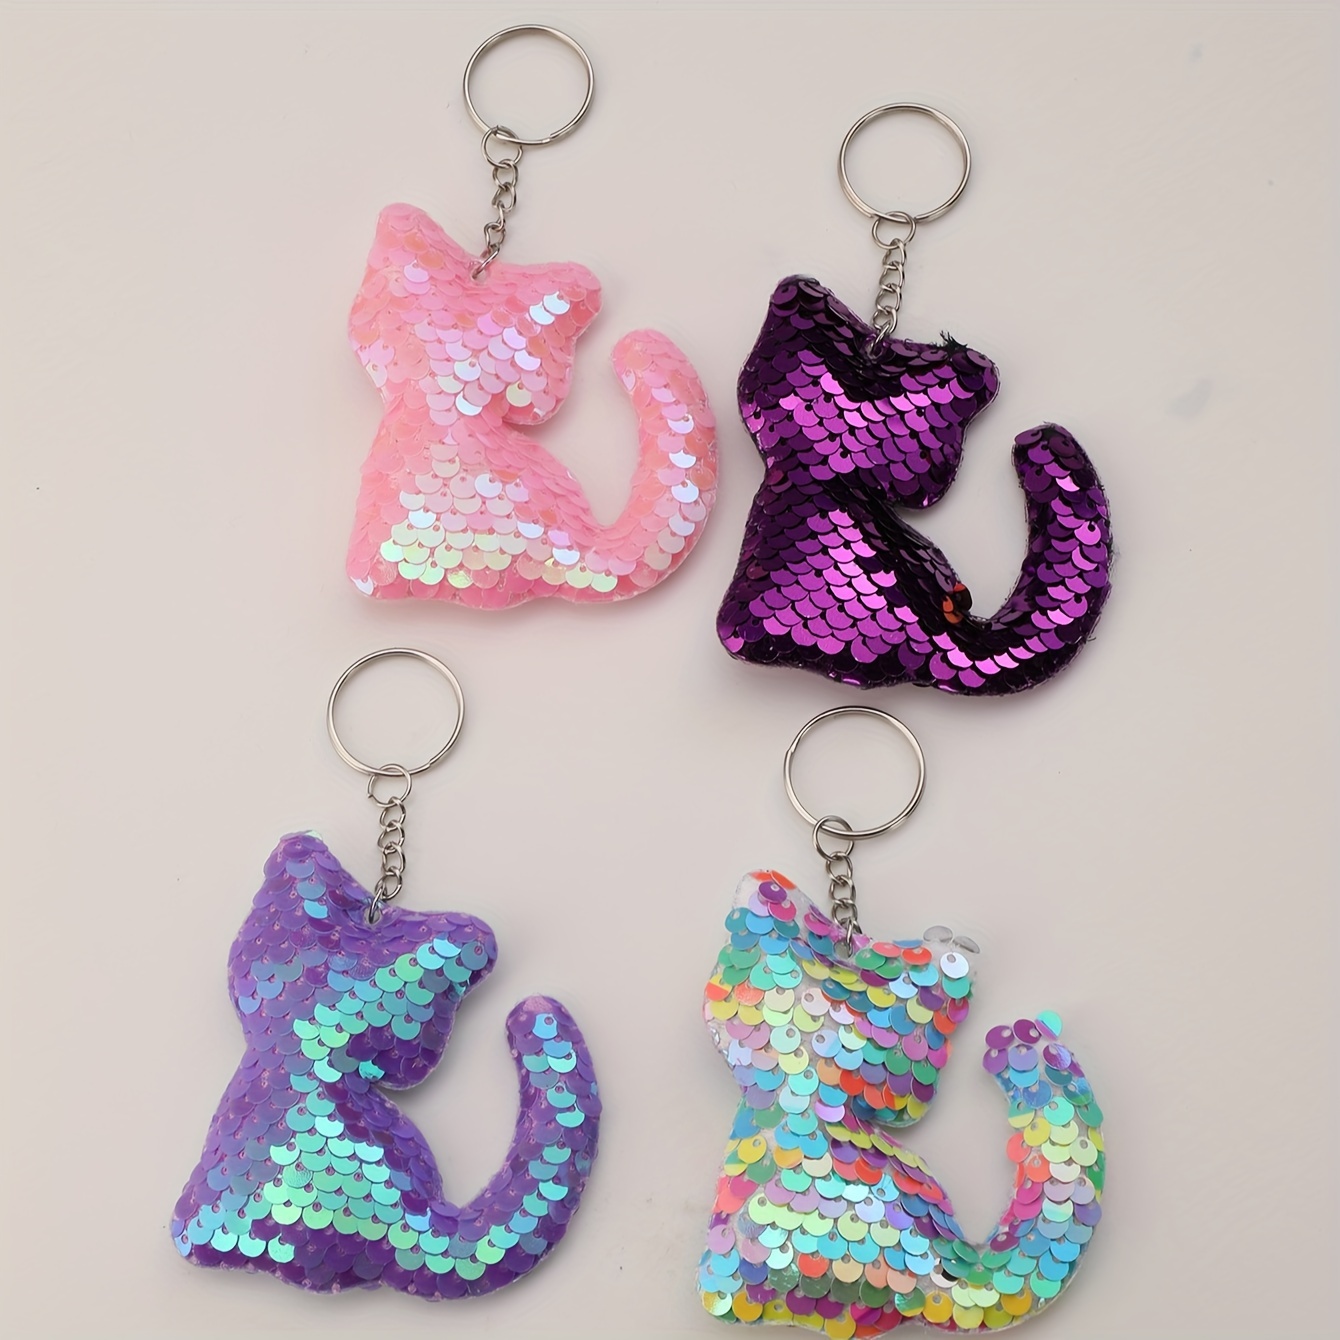 

4pcs Cute Flip Sequin Cat Keychain Colorful Shiny Animal Key Chain Ring Bag Backpack Charm Car Key Pendant Birthday Party Favors Gift